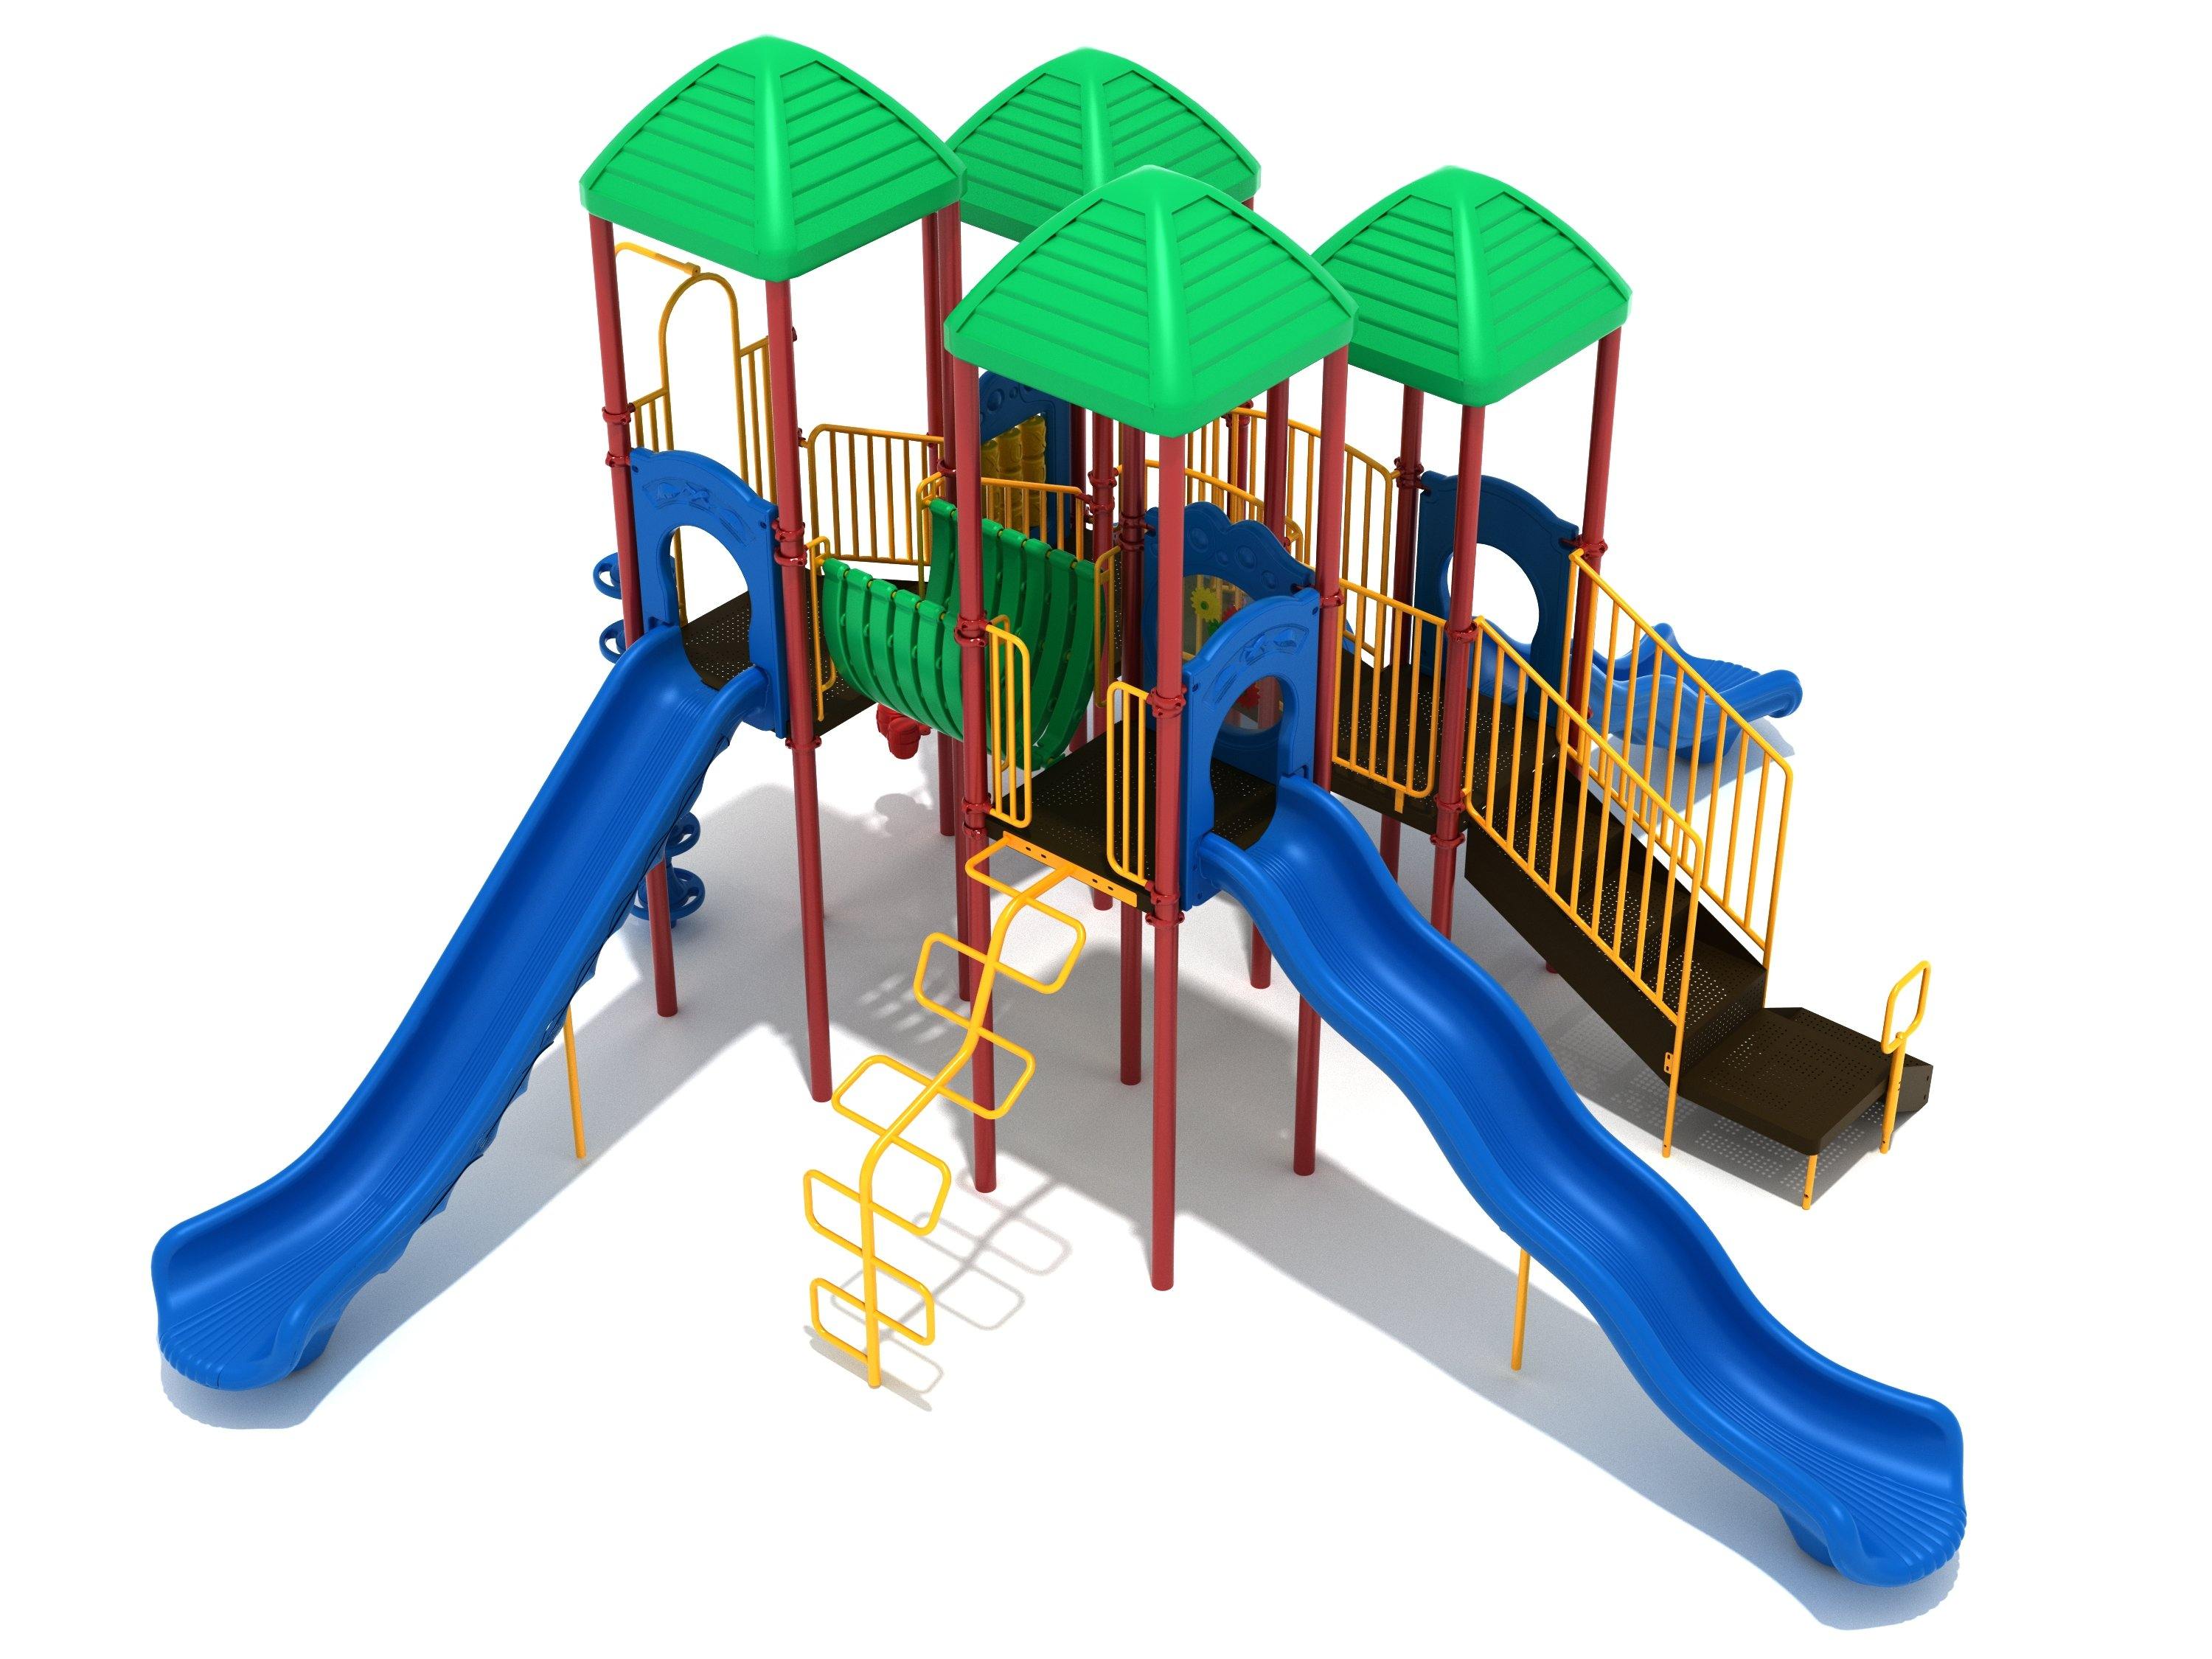 Brook's Towers - River City Play Systems